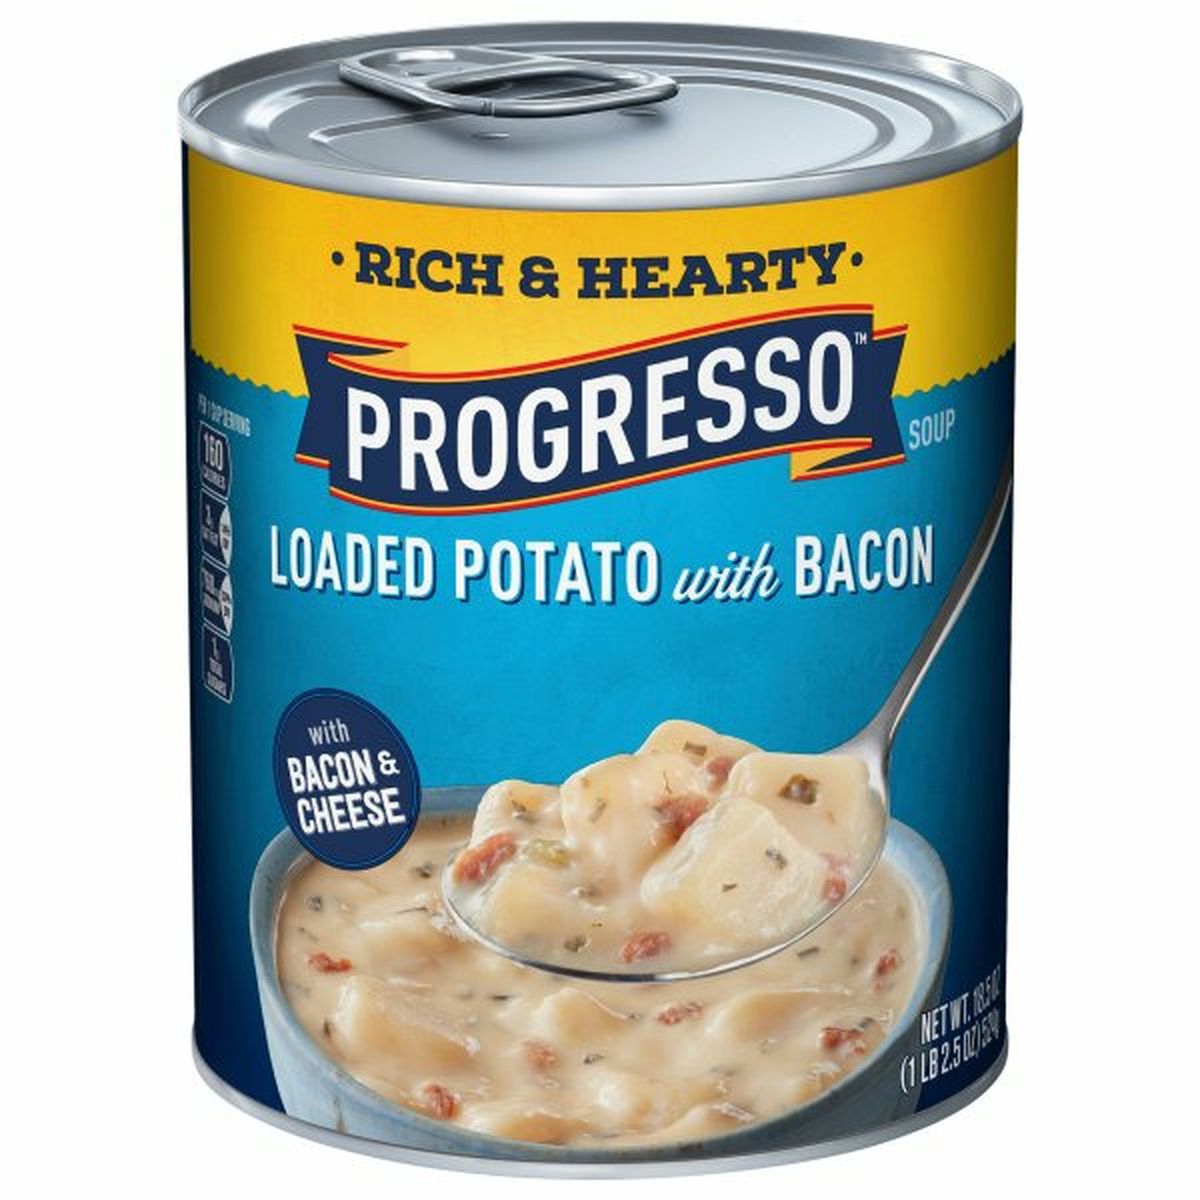 Calories in Progresso Soup, Loaded Potato with Bacon